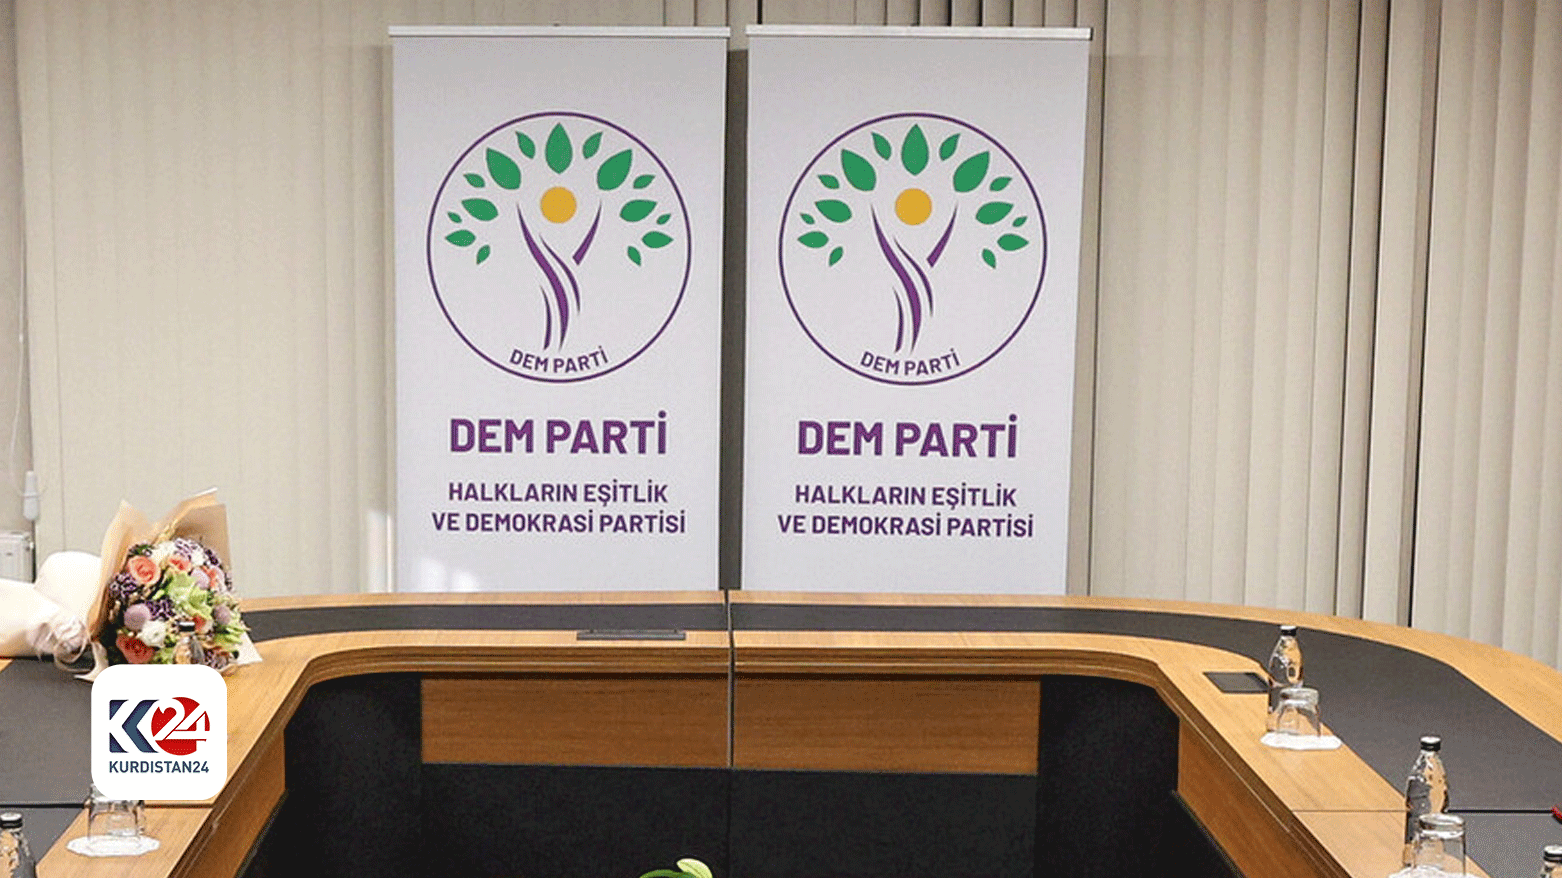 The logo of the DEM Party. (Photo: Submitted to Kurdistan24)